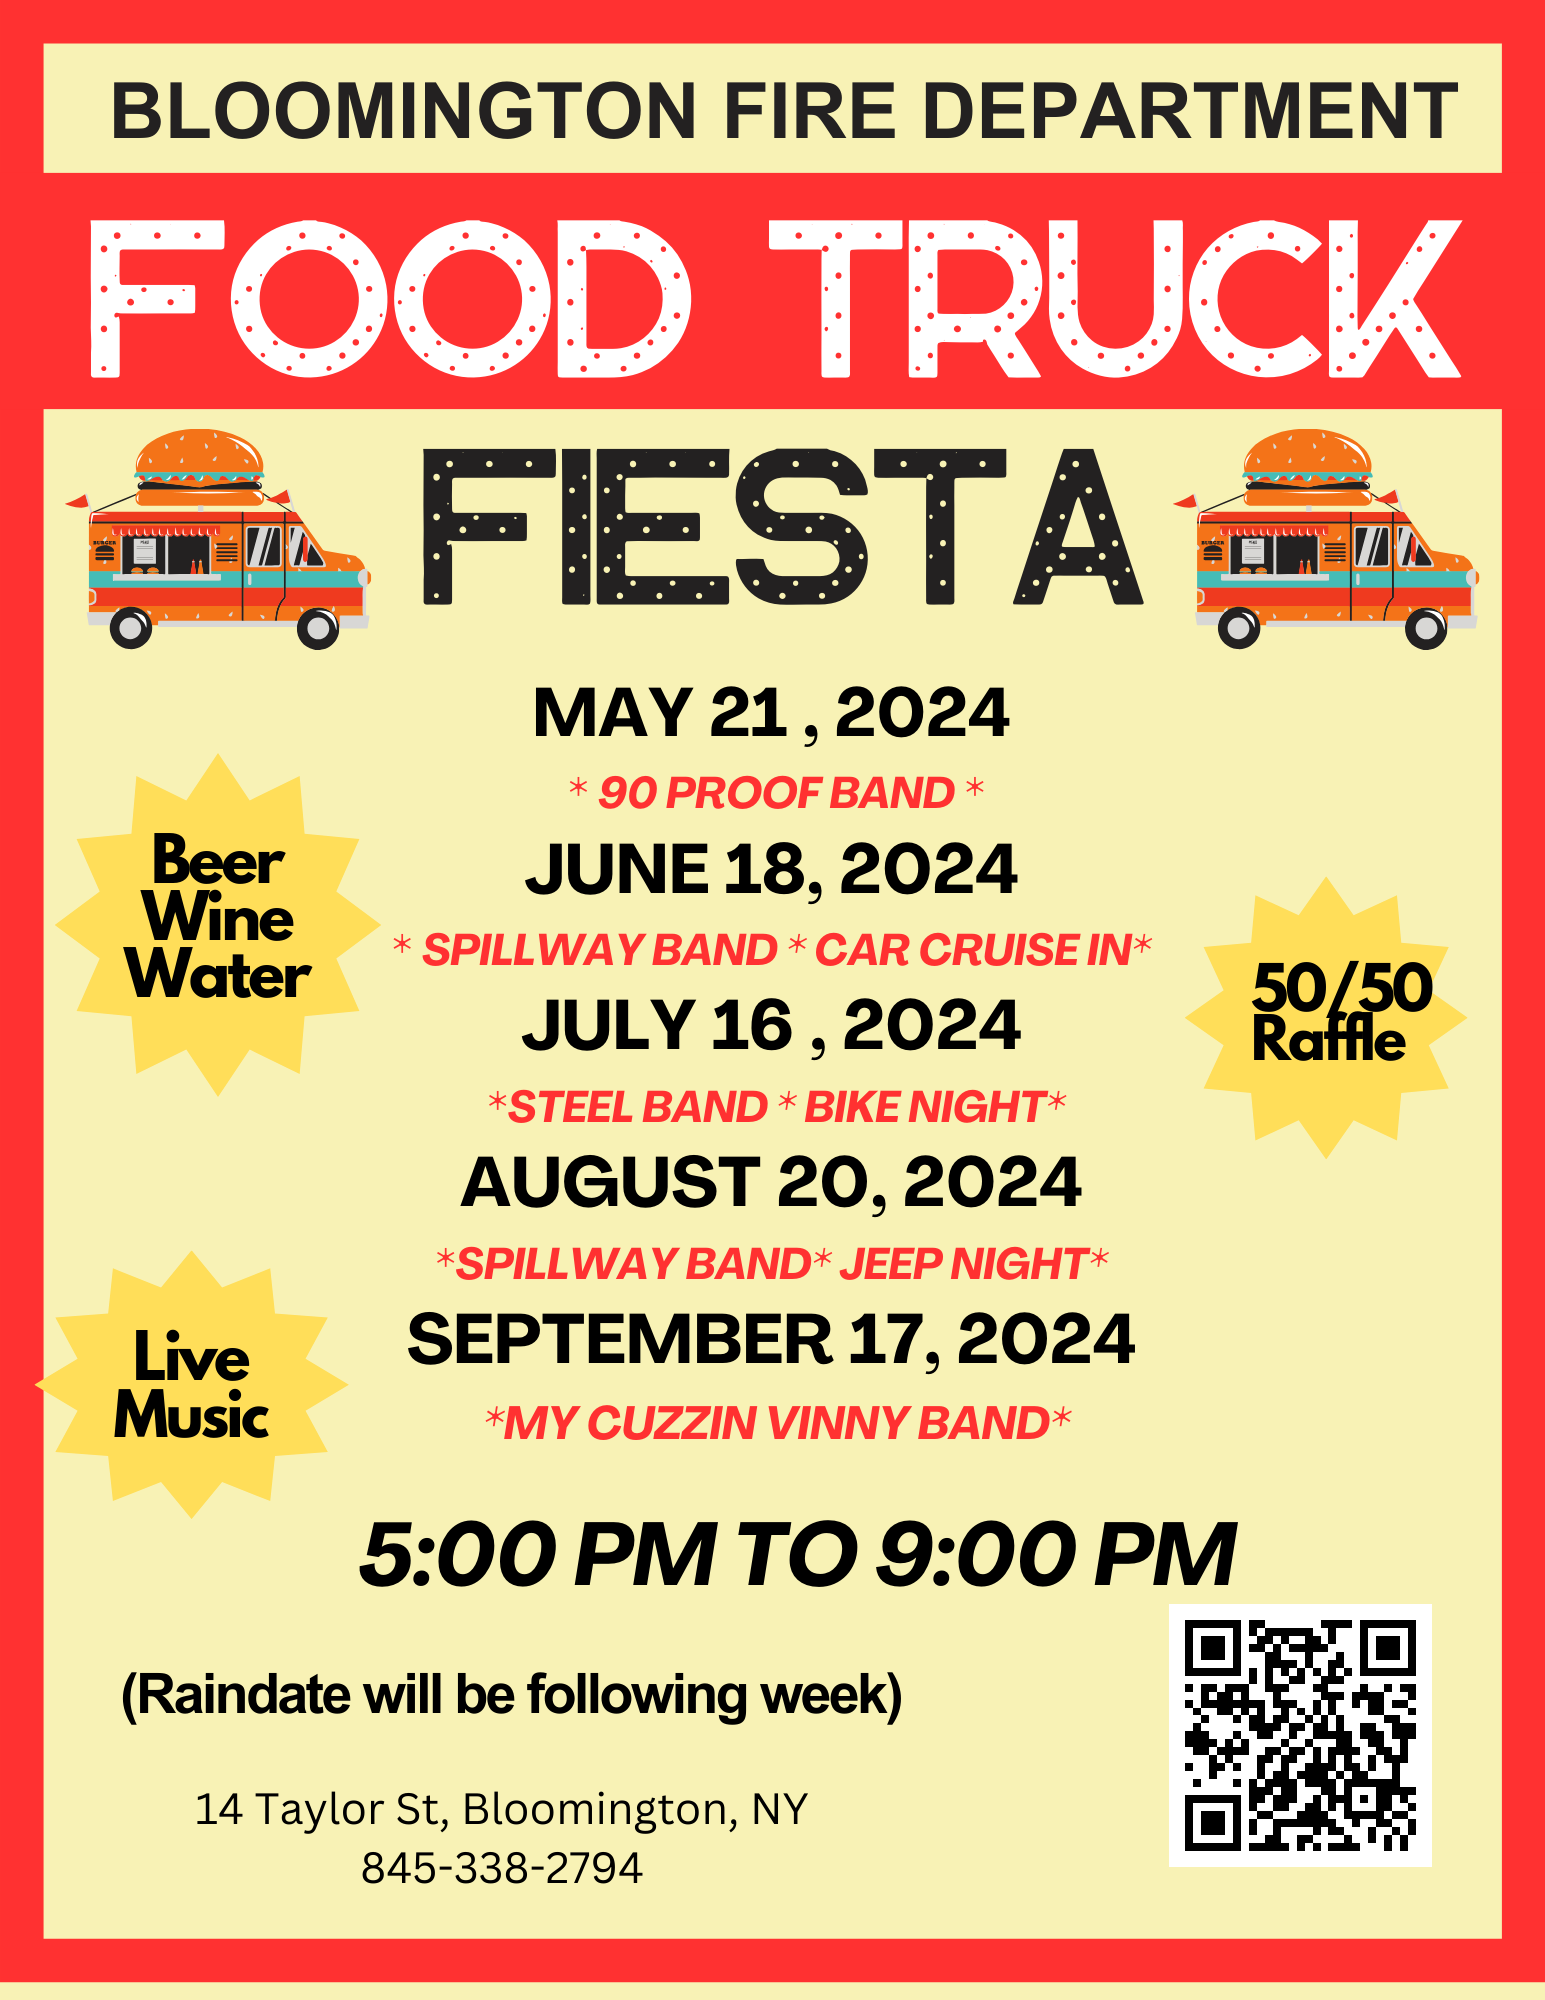 events flyer for food trucks in Bloomington, NY